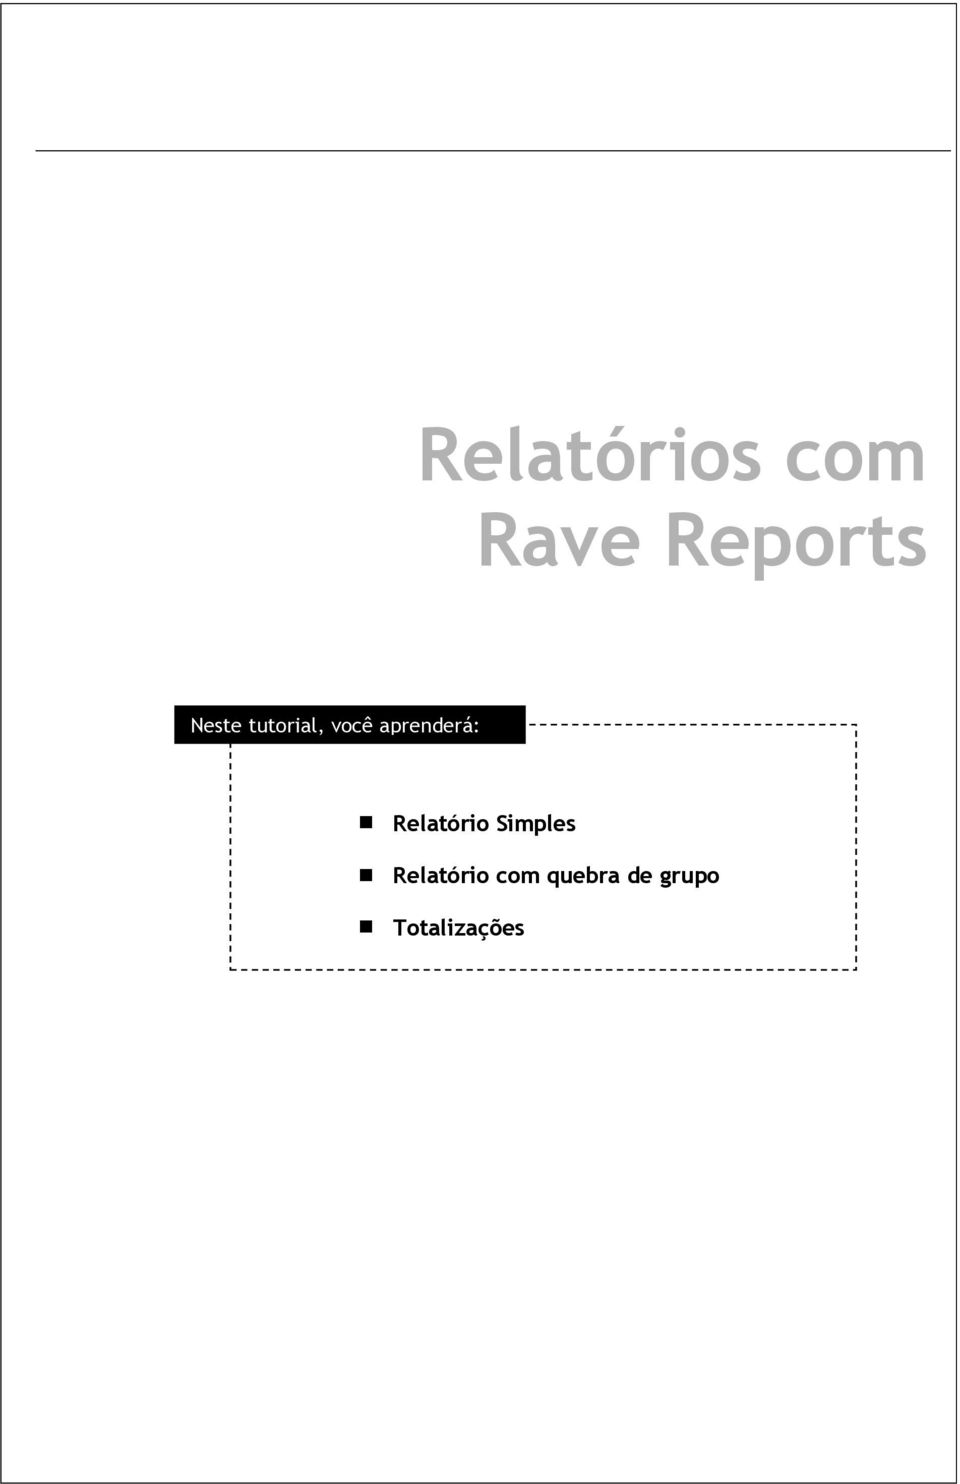 Rave Reports Tutorial